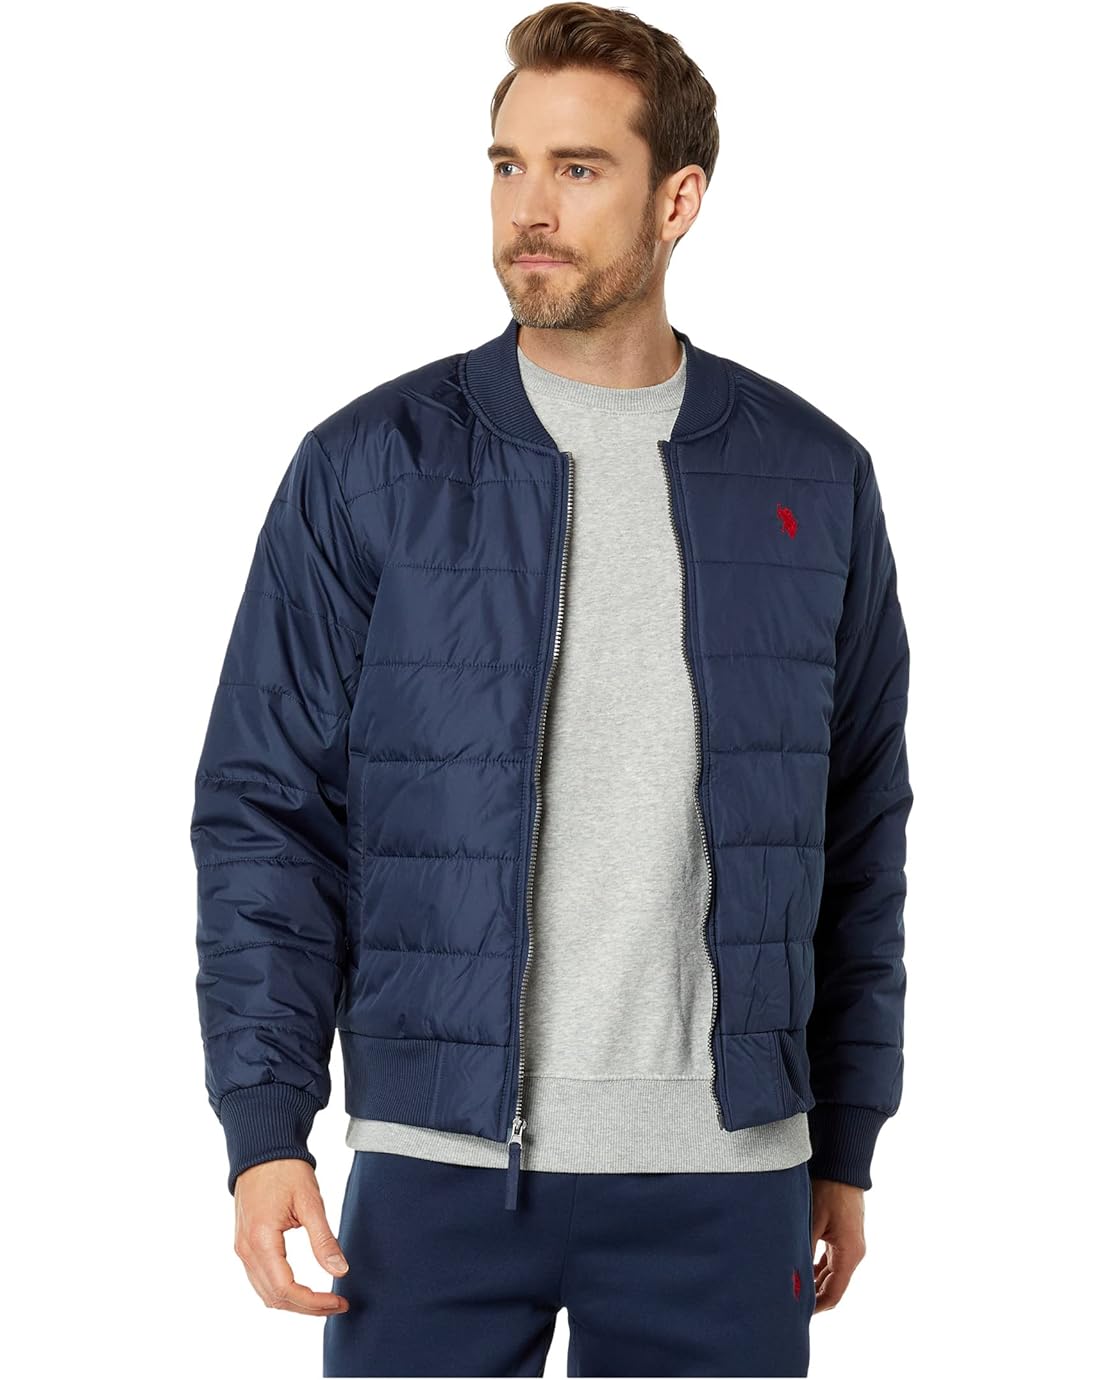  U.S. POLO ASSN. Quilted Bomber Jacket